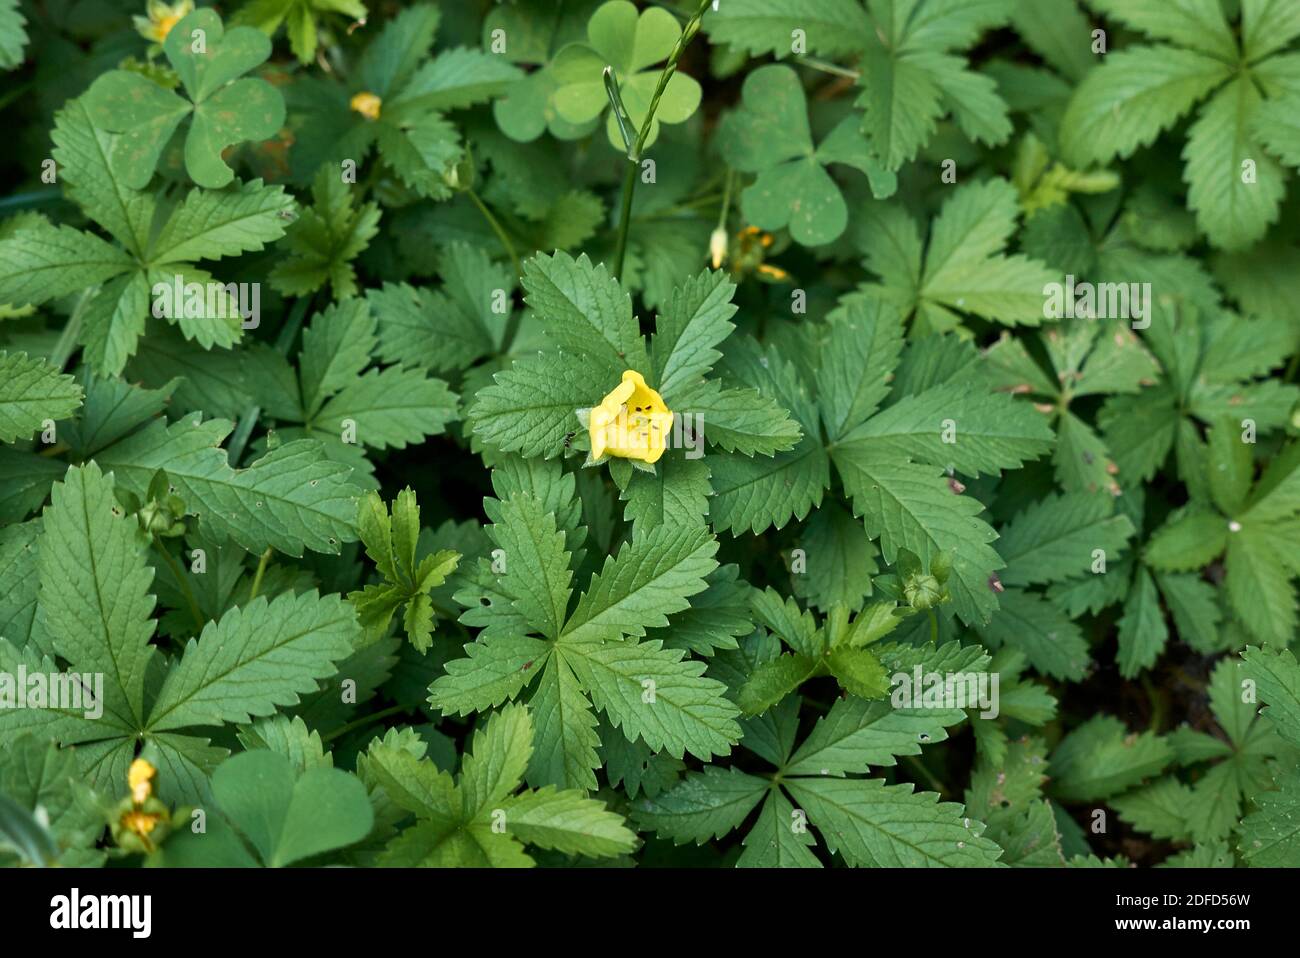 Potentilla reptans  close up with yellow flowers Stock Photo